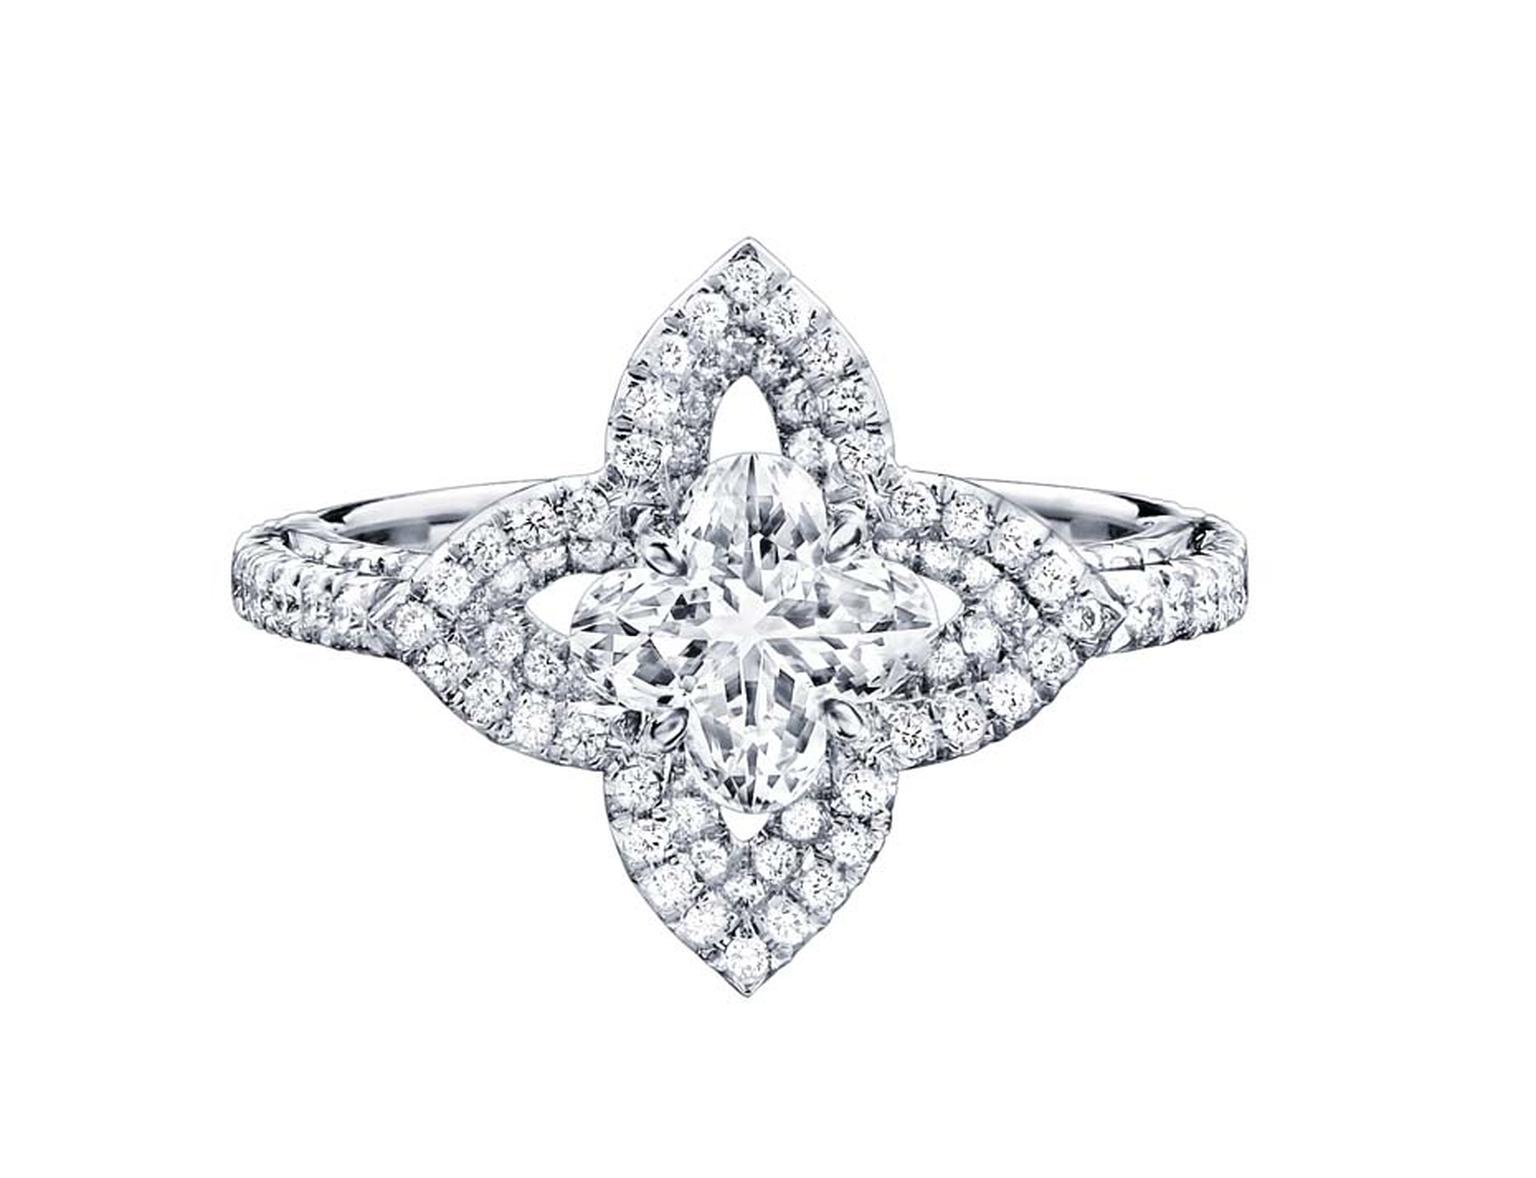 Solitaire diamond ring from the Monogram Fusion collection, set with a patented Louis Vuitton flower-cut diamond at the centre.